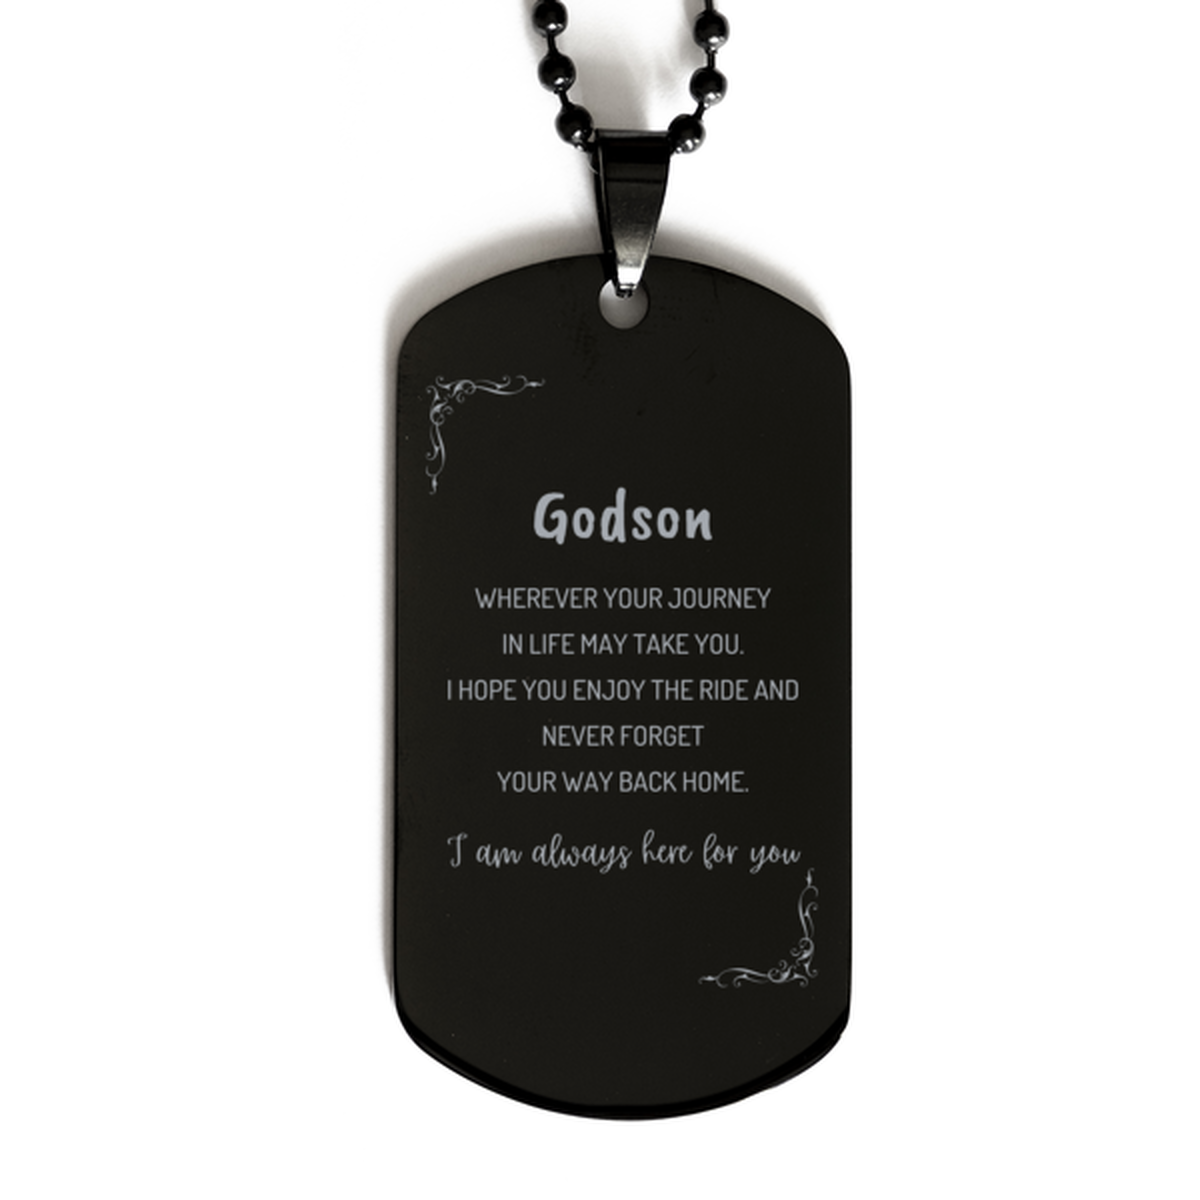 Godson wherever your journey in life may take you, I am always here for you Godson Black Dog Tag, Awesome Christmas Gifts For Godson, Godson Birthday Gifts for Men Women Family Loved One